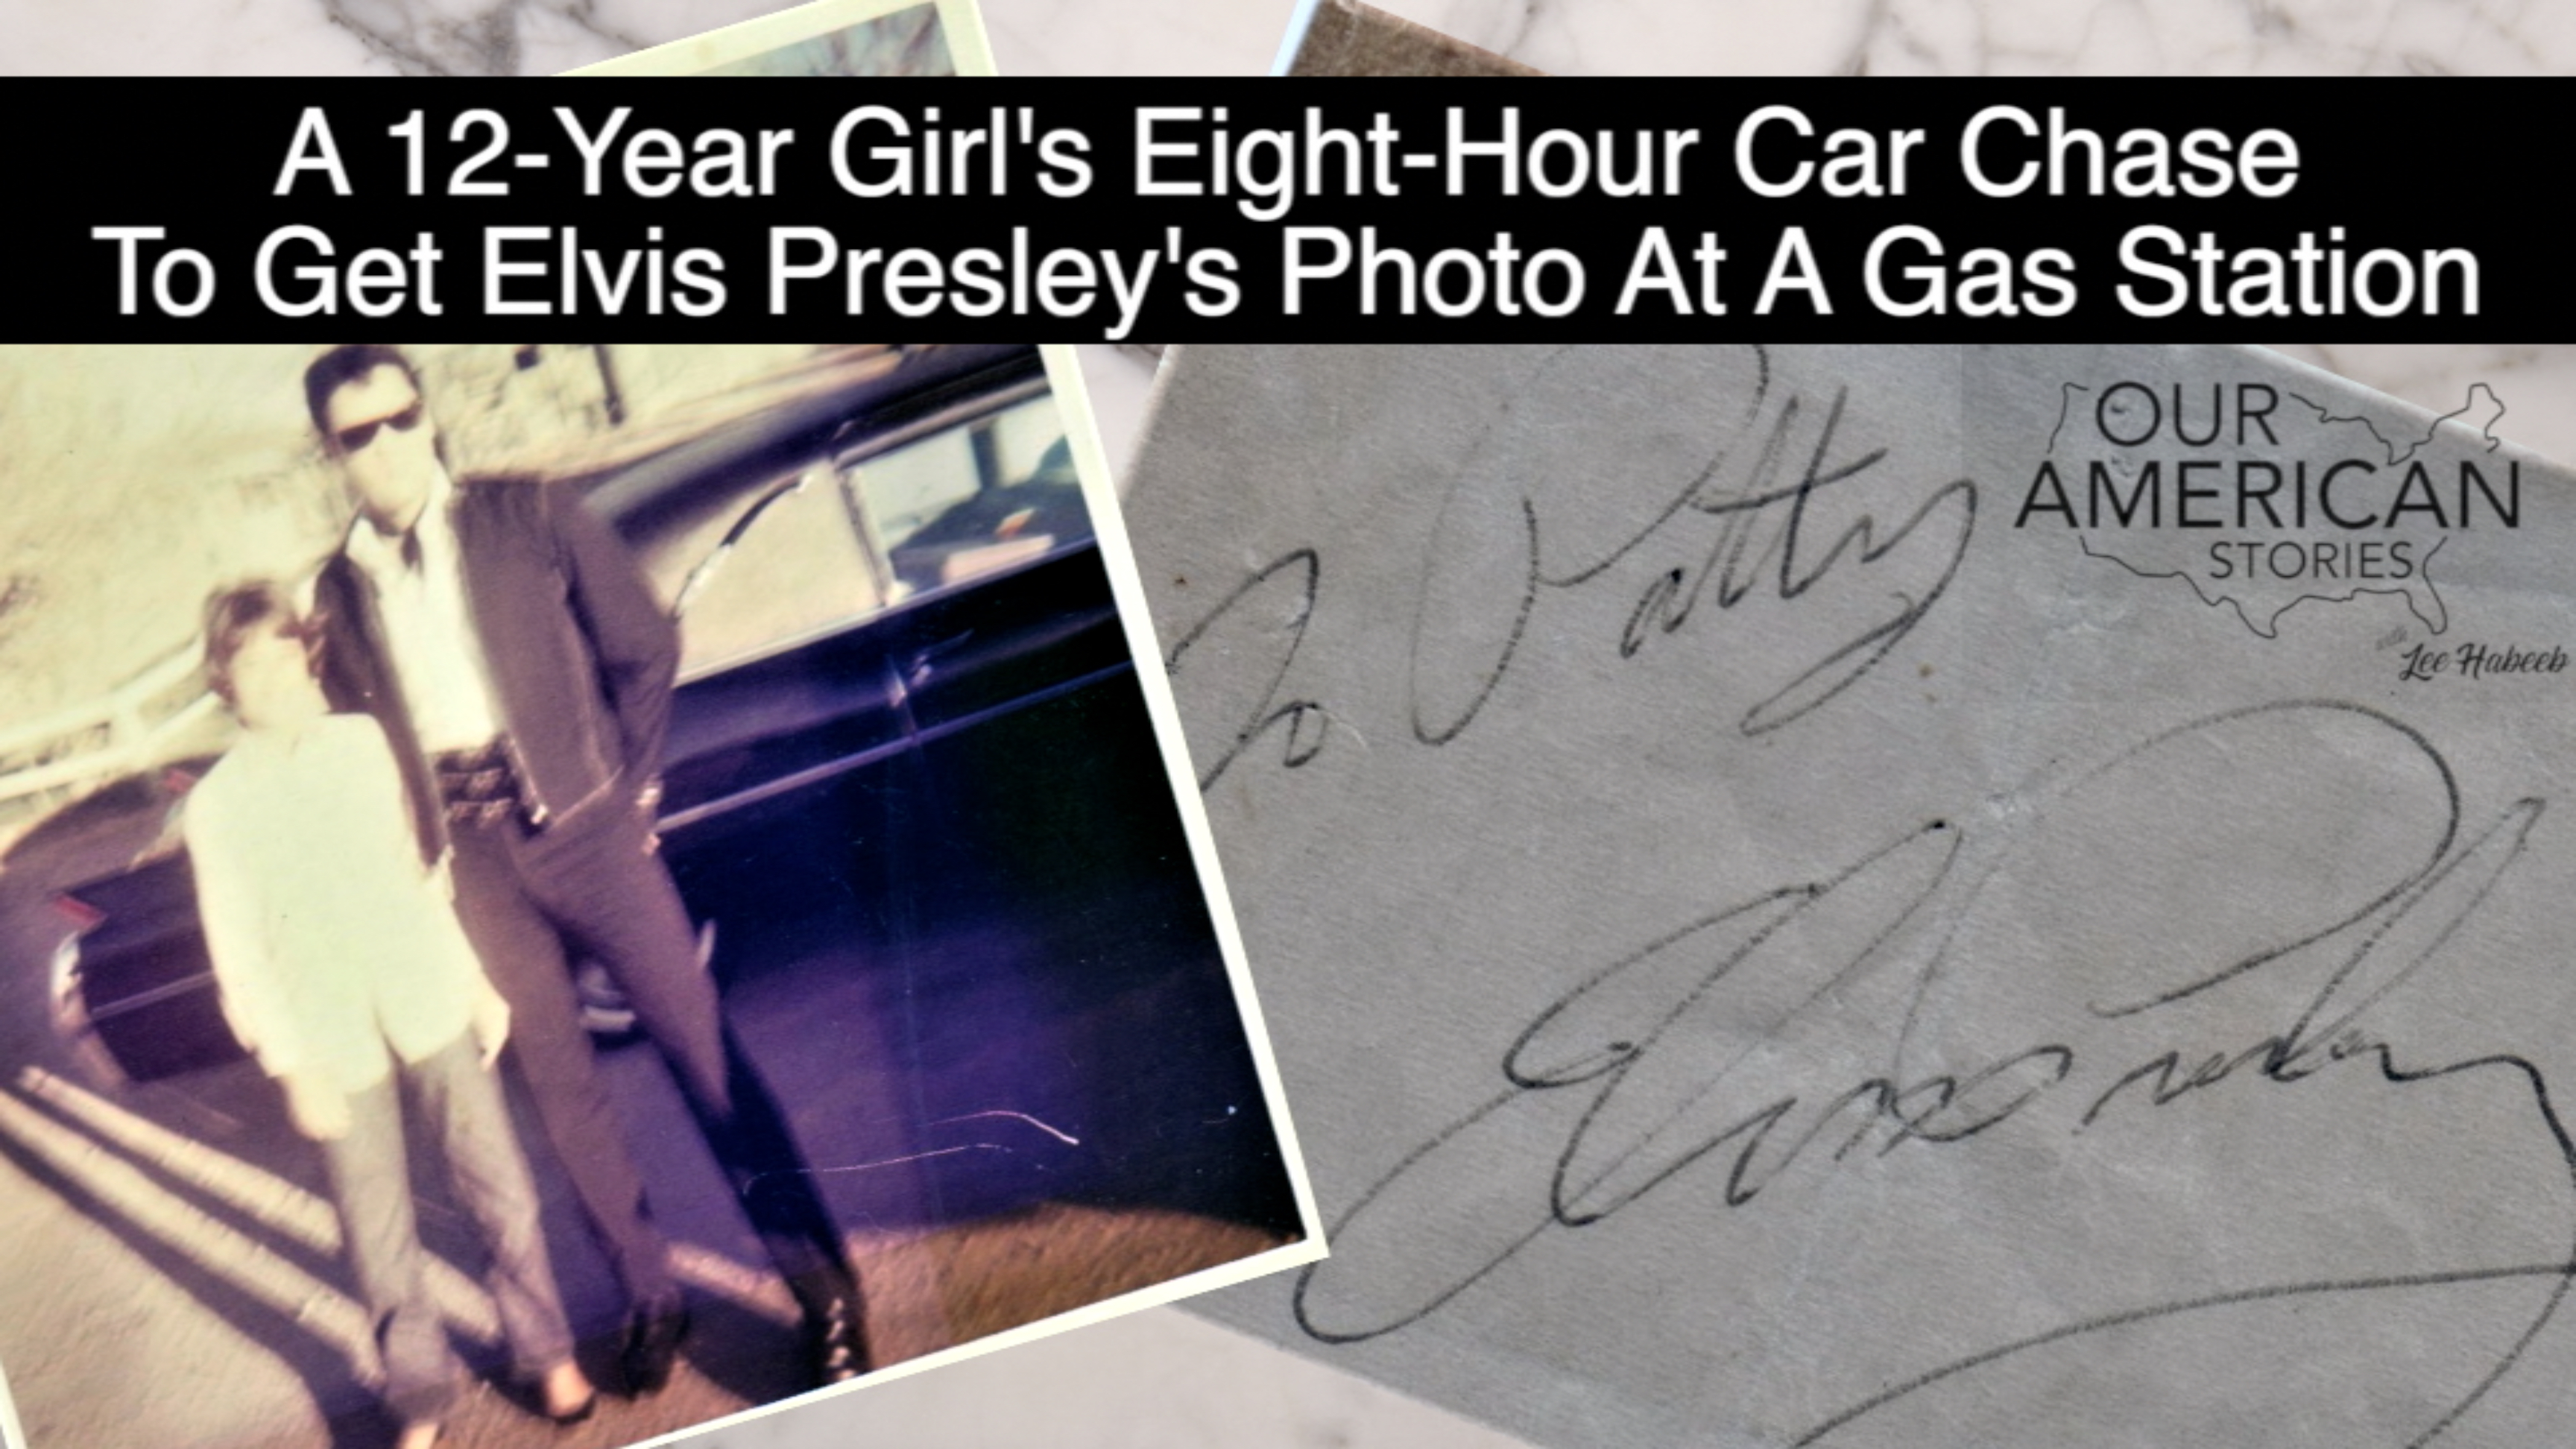 A 12-Year Girl's Eight-Hour Car Chase To Get Elvis Presley's Photo At A Gas Station